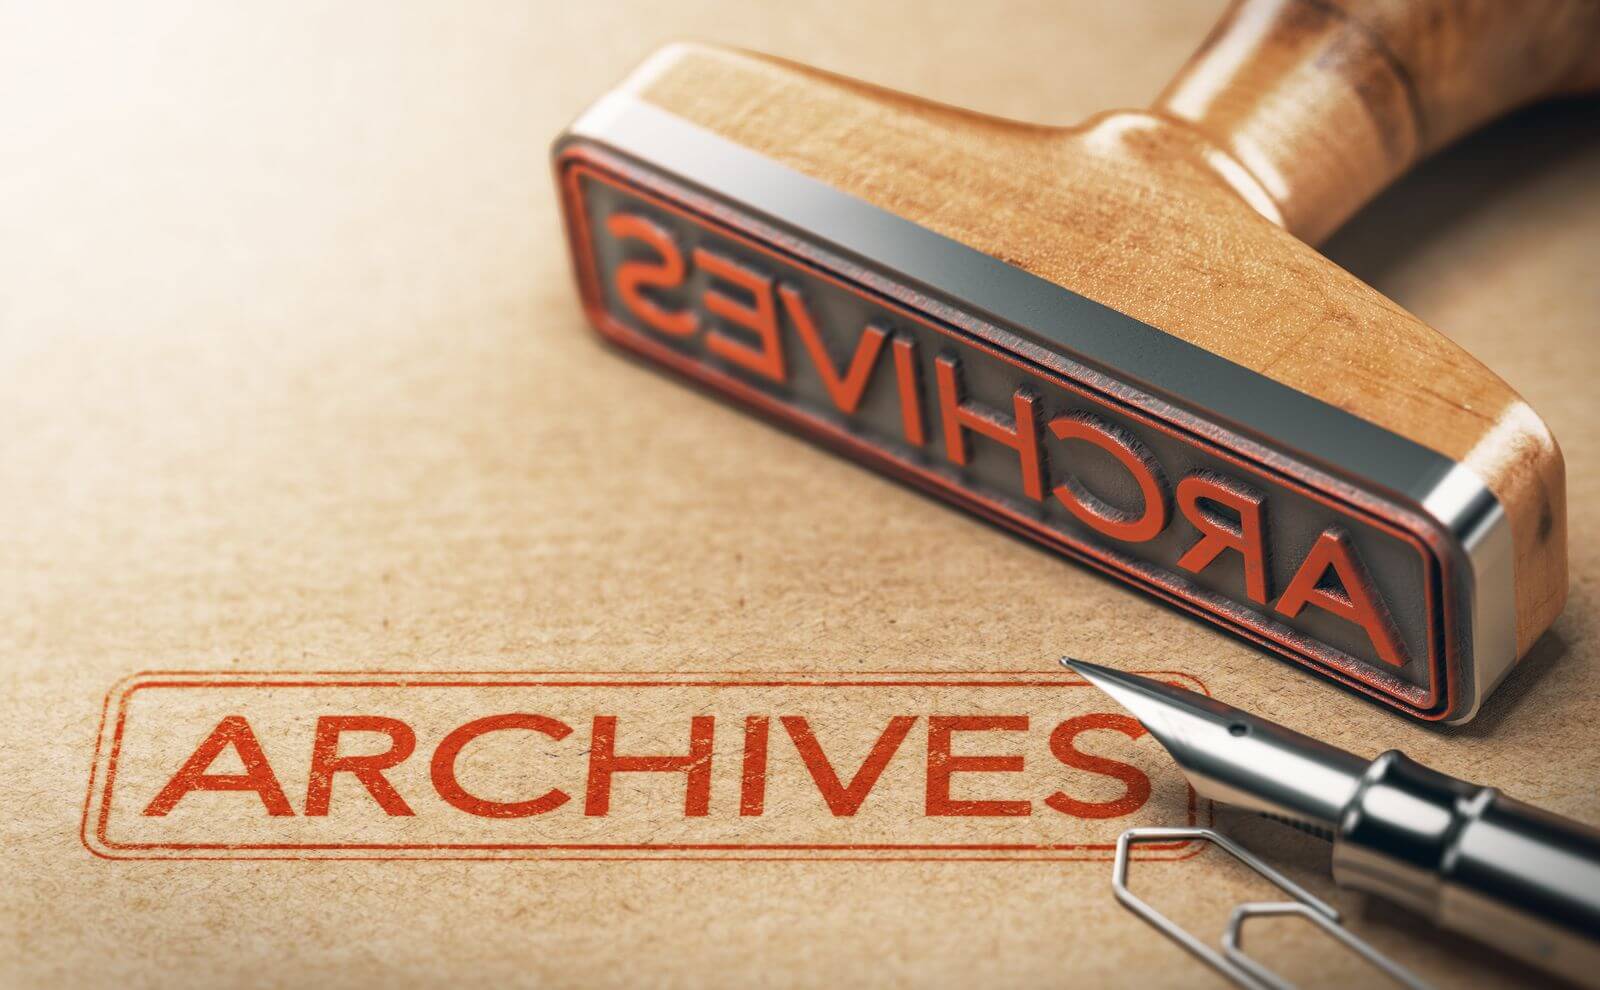 You are currently viewing Archivage, stockage, quelles différences ?